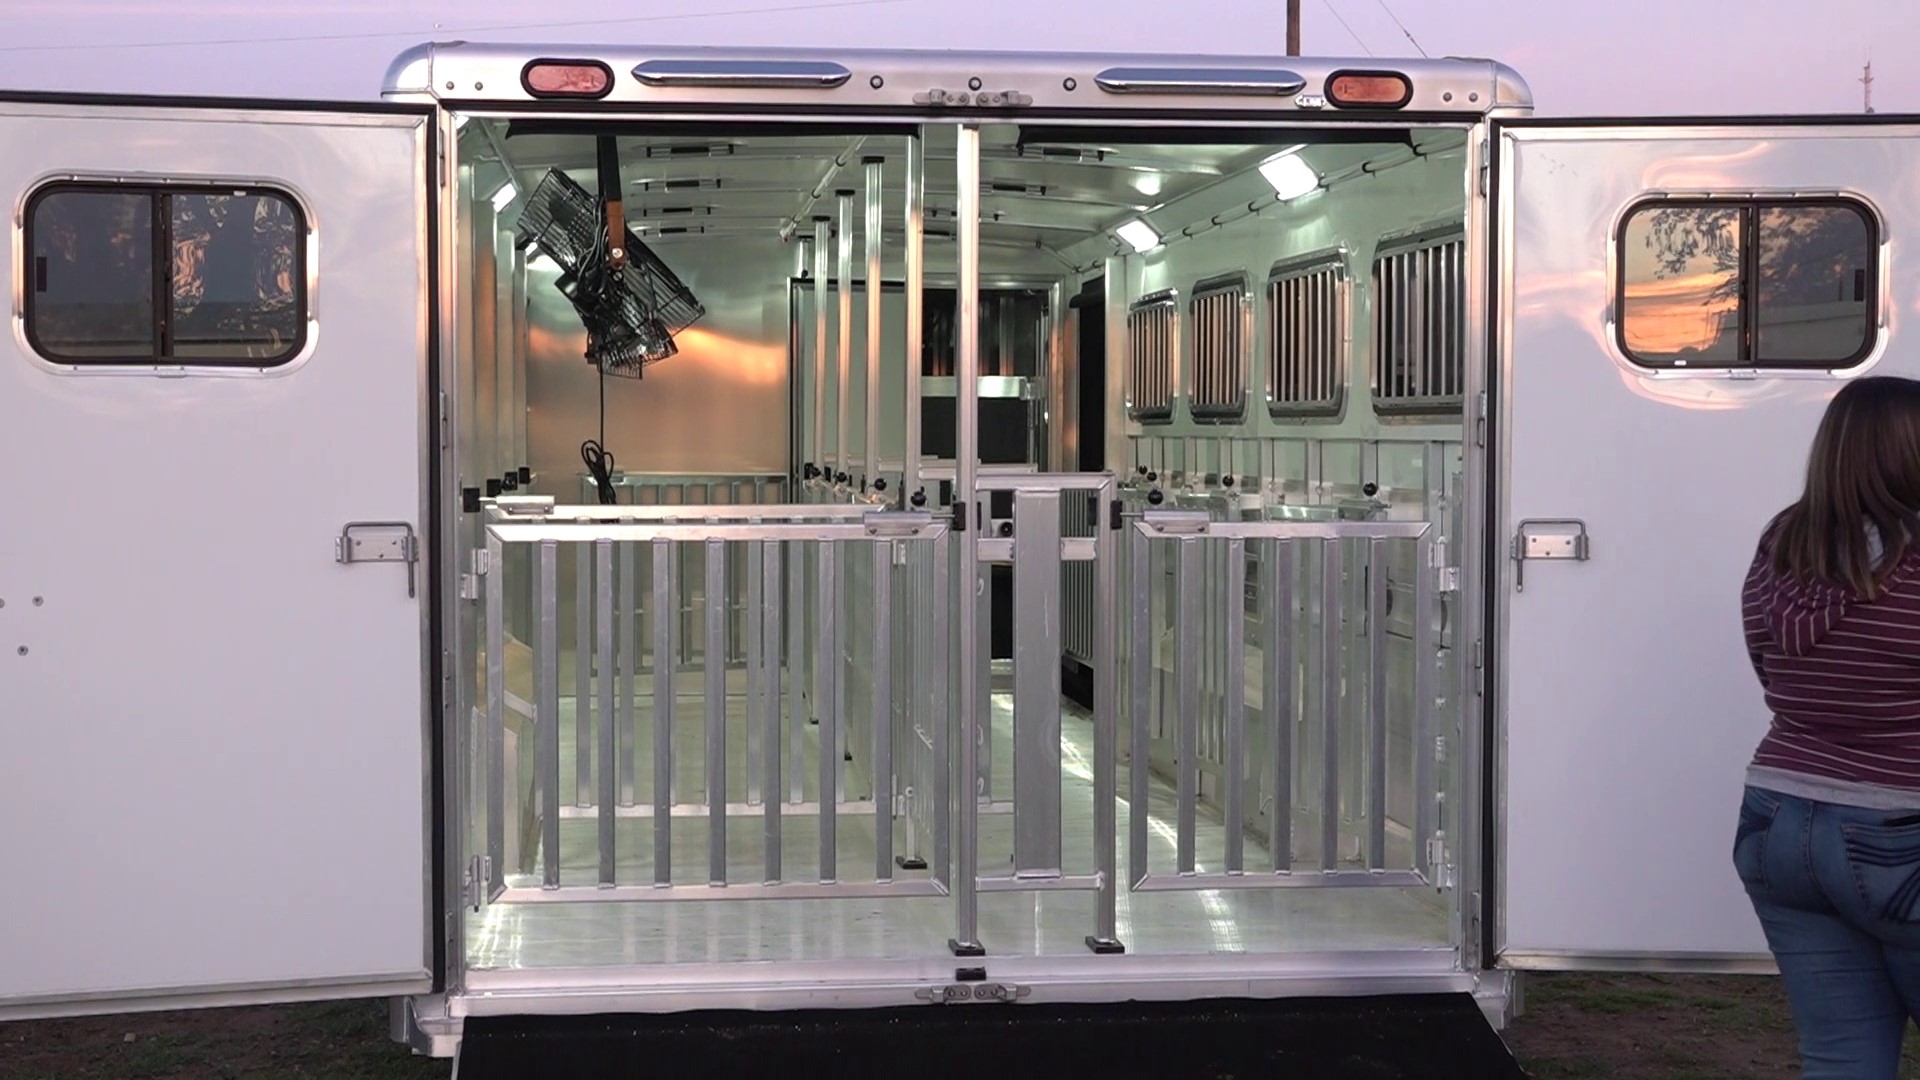 The trailer will be used by the Agricultural teams at Legacy High School, which recently tripled the number of animals in the program.